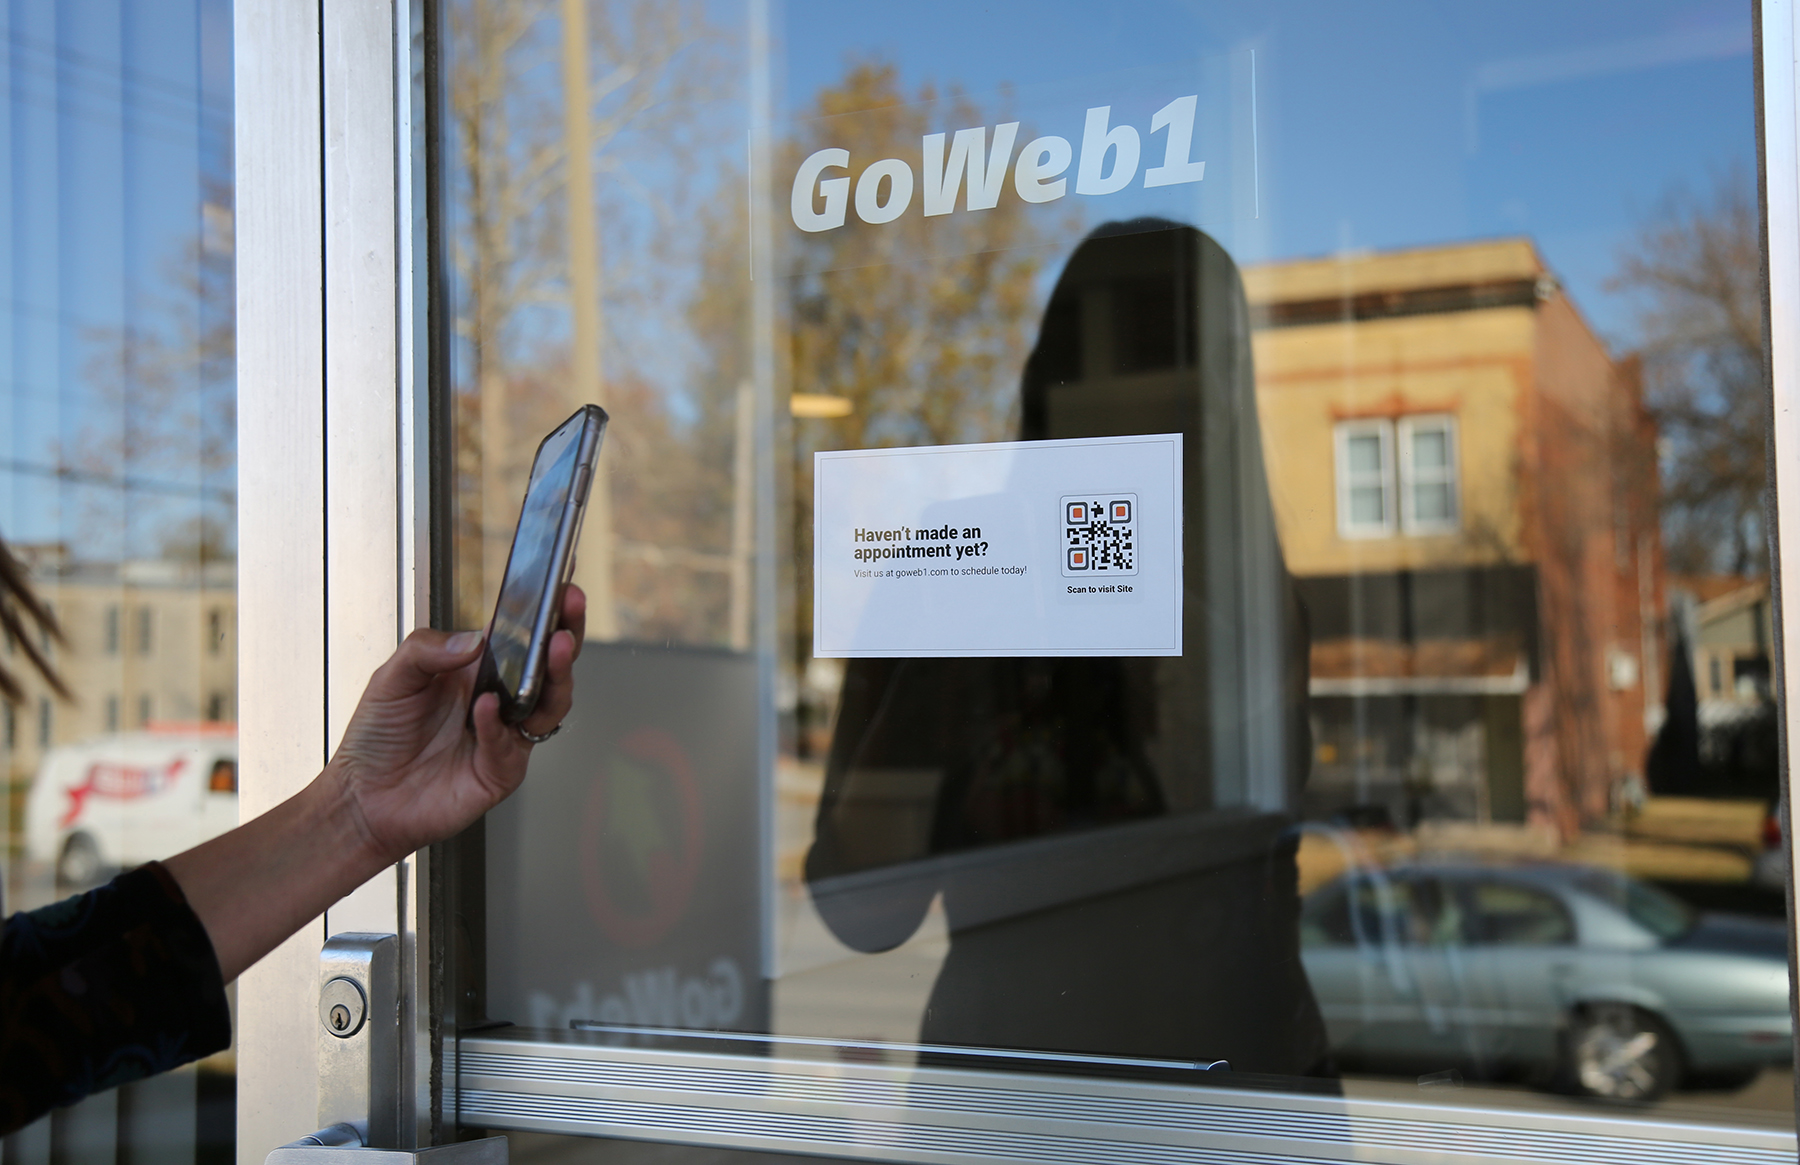 goweb1 door with appointment qr code